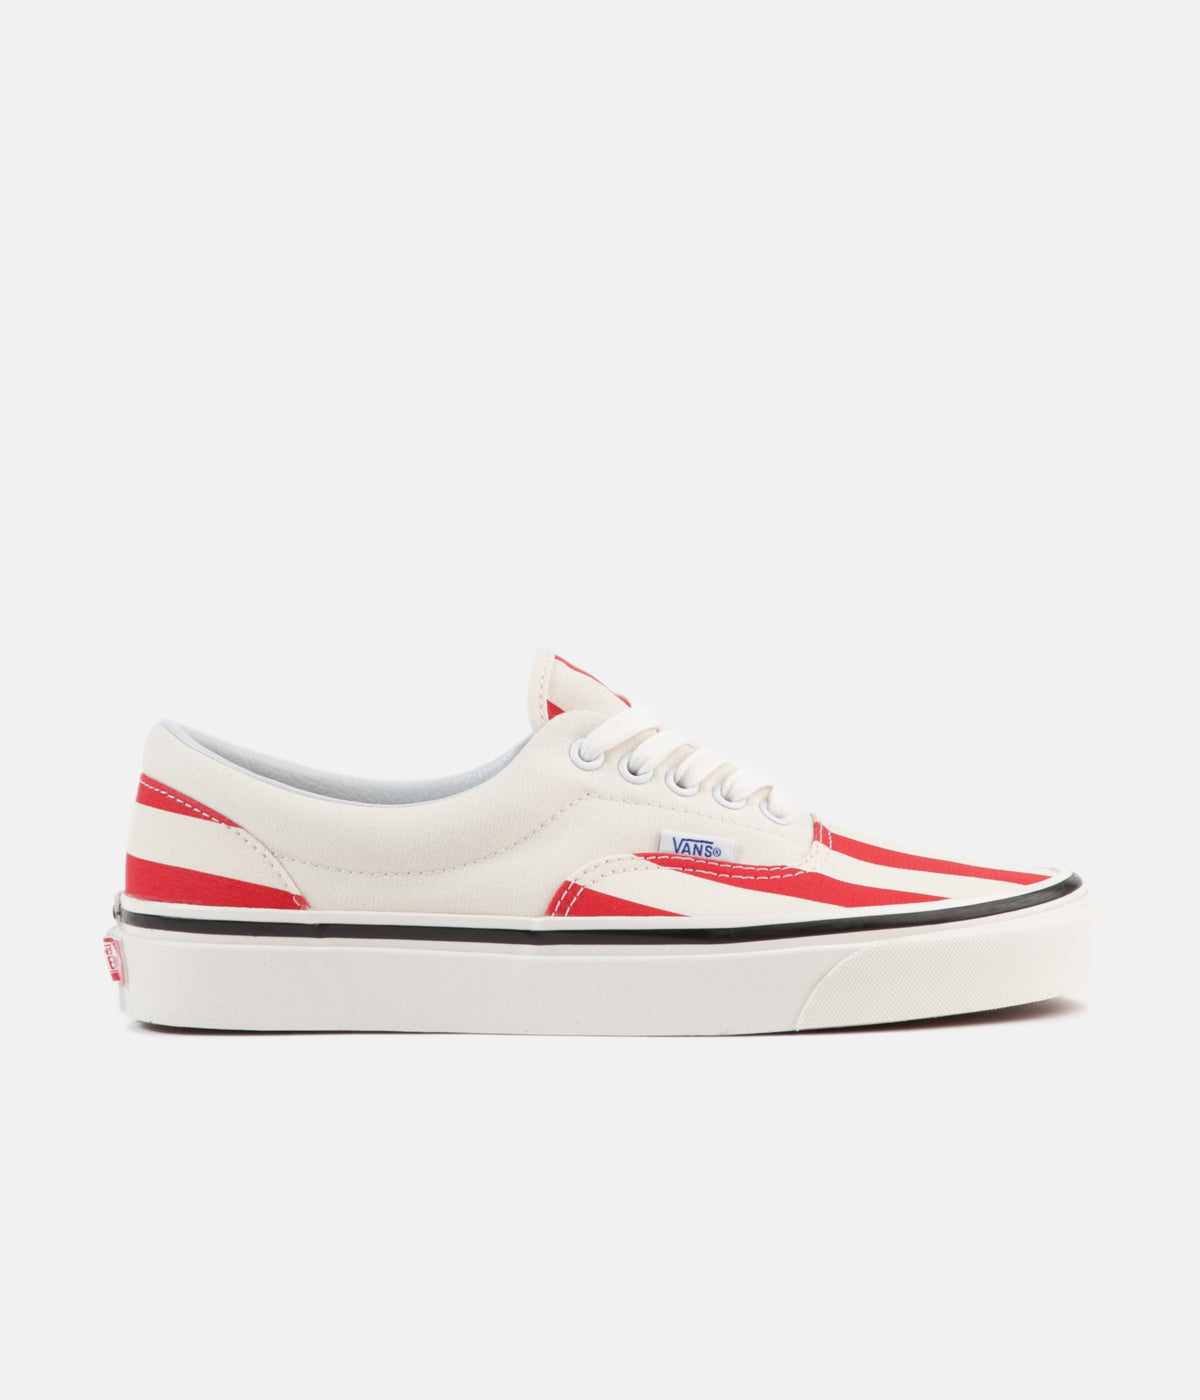 vans white and red stripe